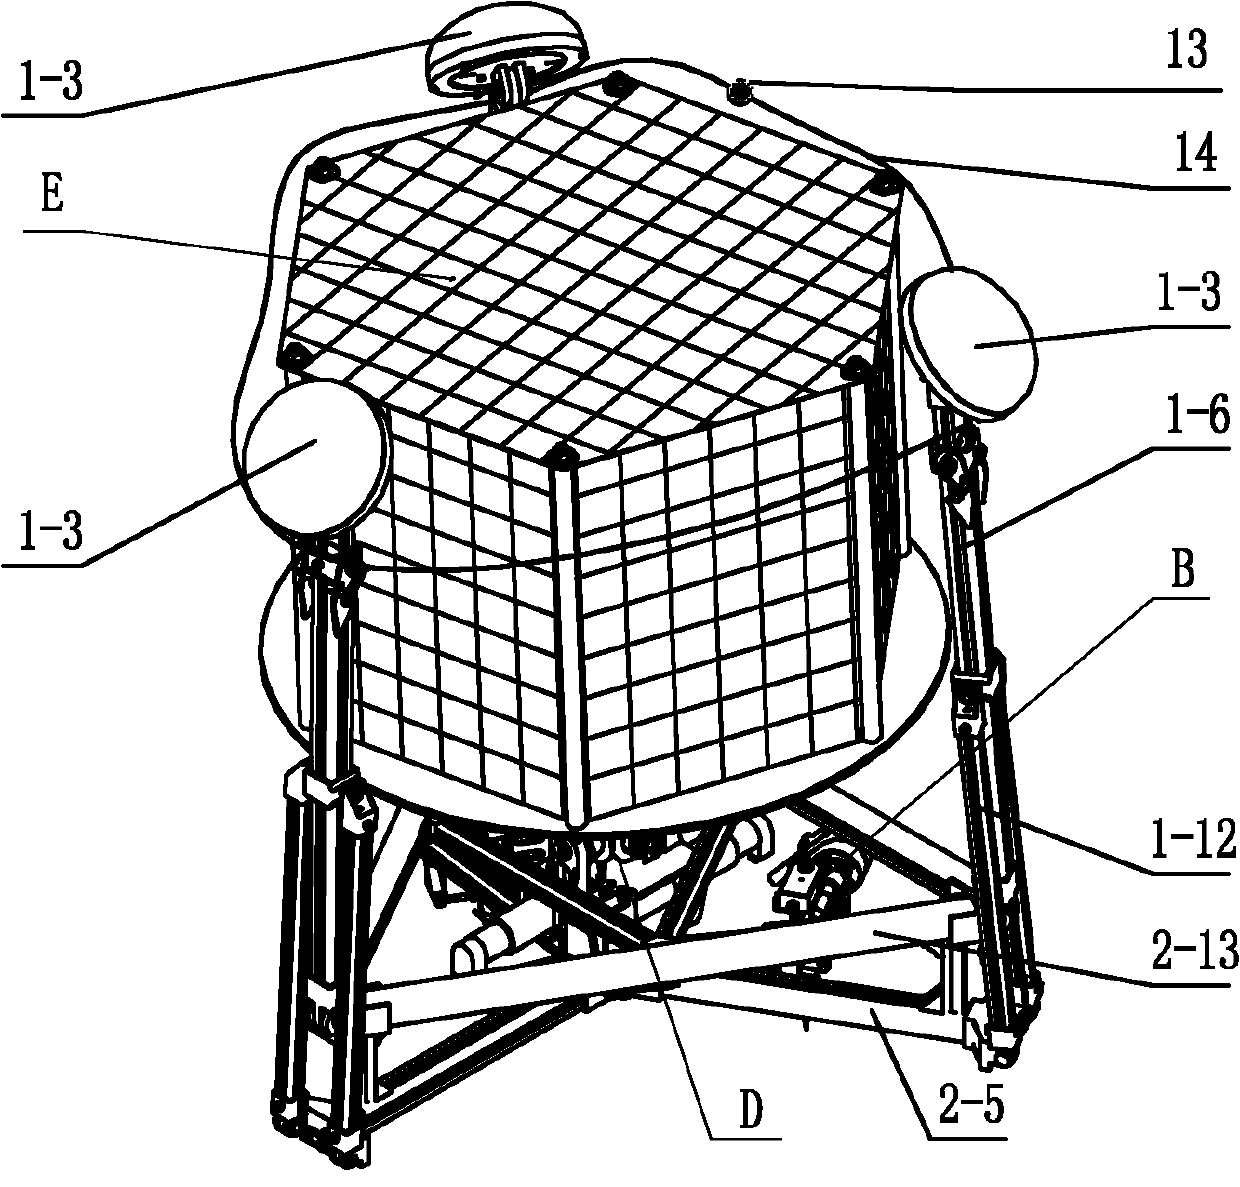 Attached mechanism of small star lander